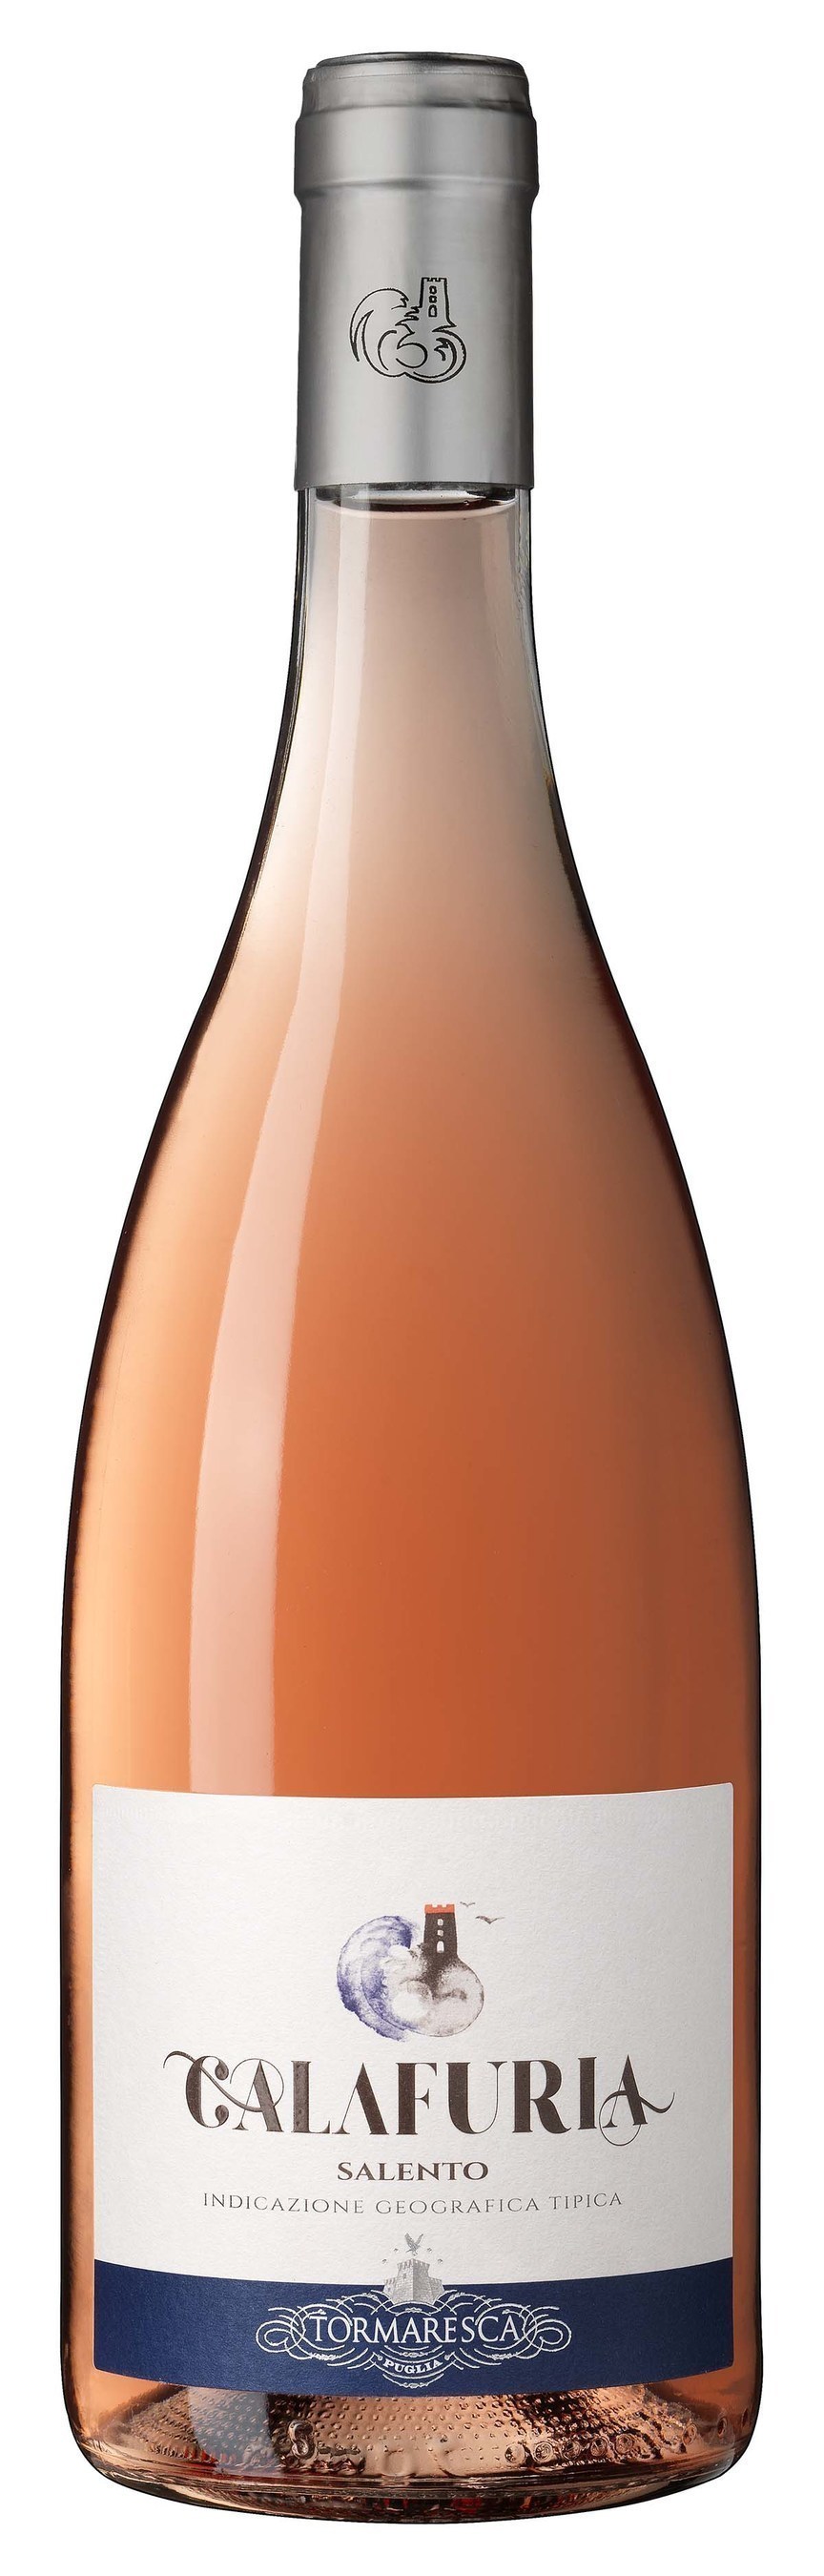 Tormaresca, a leader in Puglia's modern wine renaissance, has officially released a 100% Negroamaro Rosato called "Calafuria" that is now available on and off premise nationally.